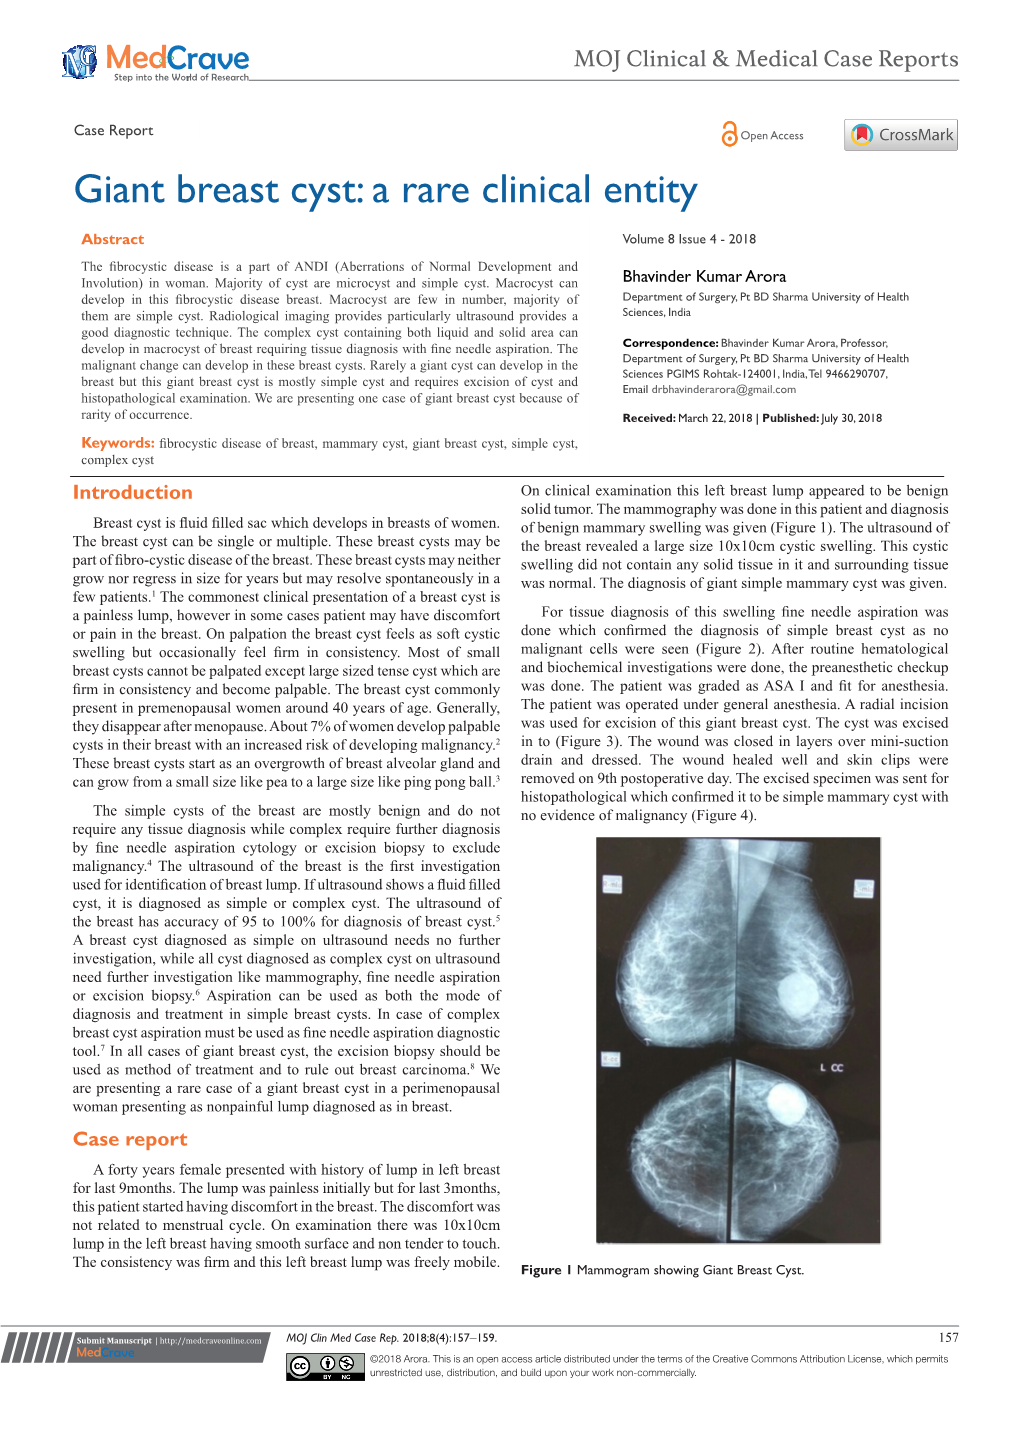 Giant Breast Cyst: a Rare Clinical Entity